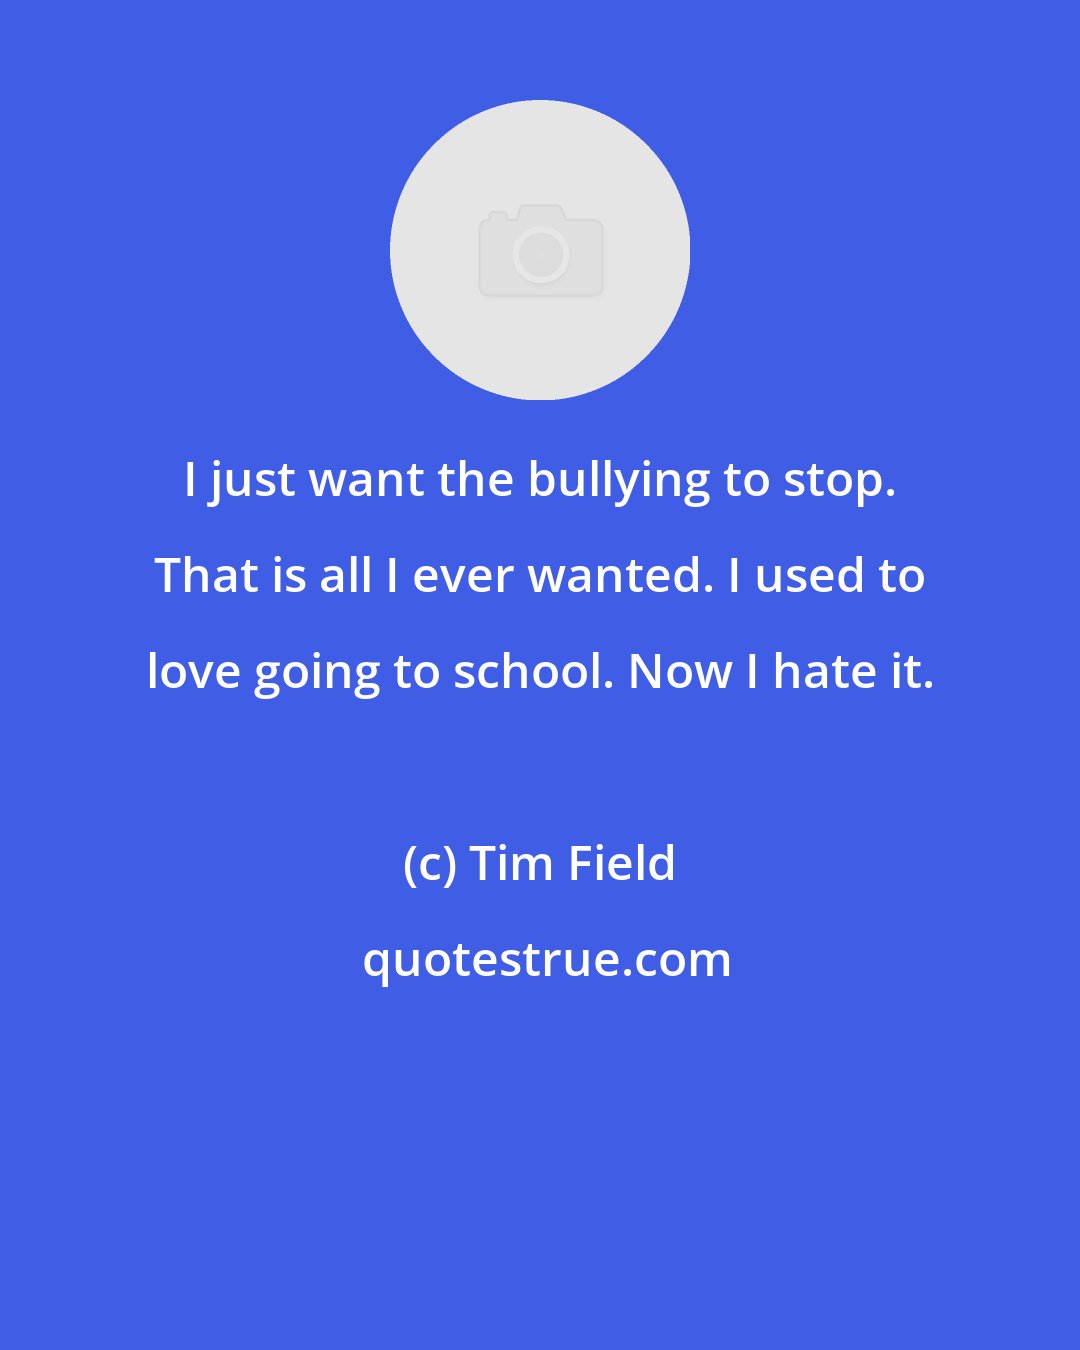 Tim Field: I just want the bullying to stop. That is all I ever wanted. I used to love going to school. Now I hate it.